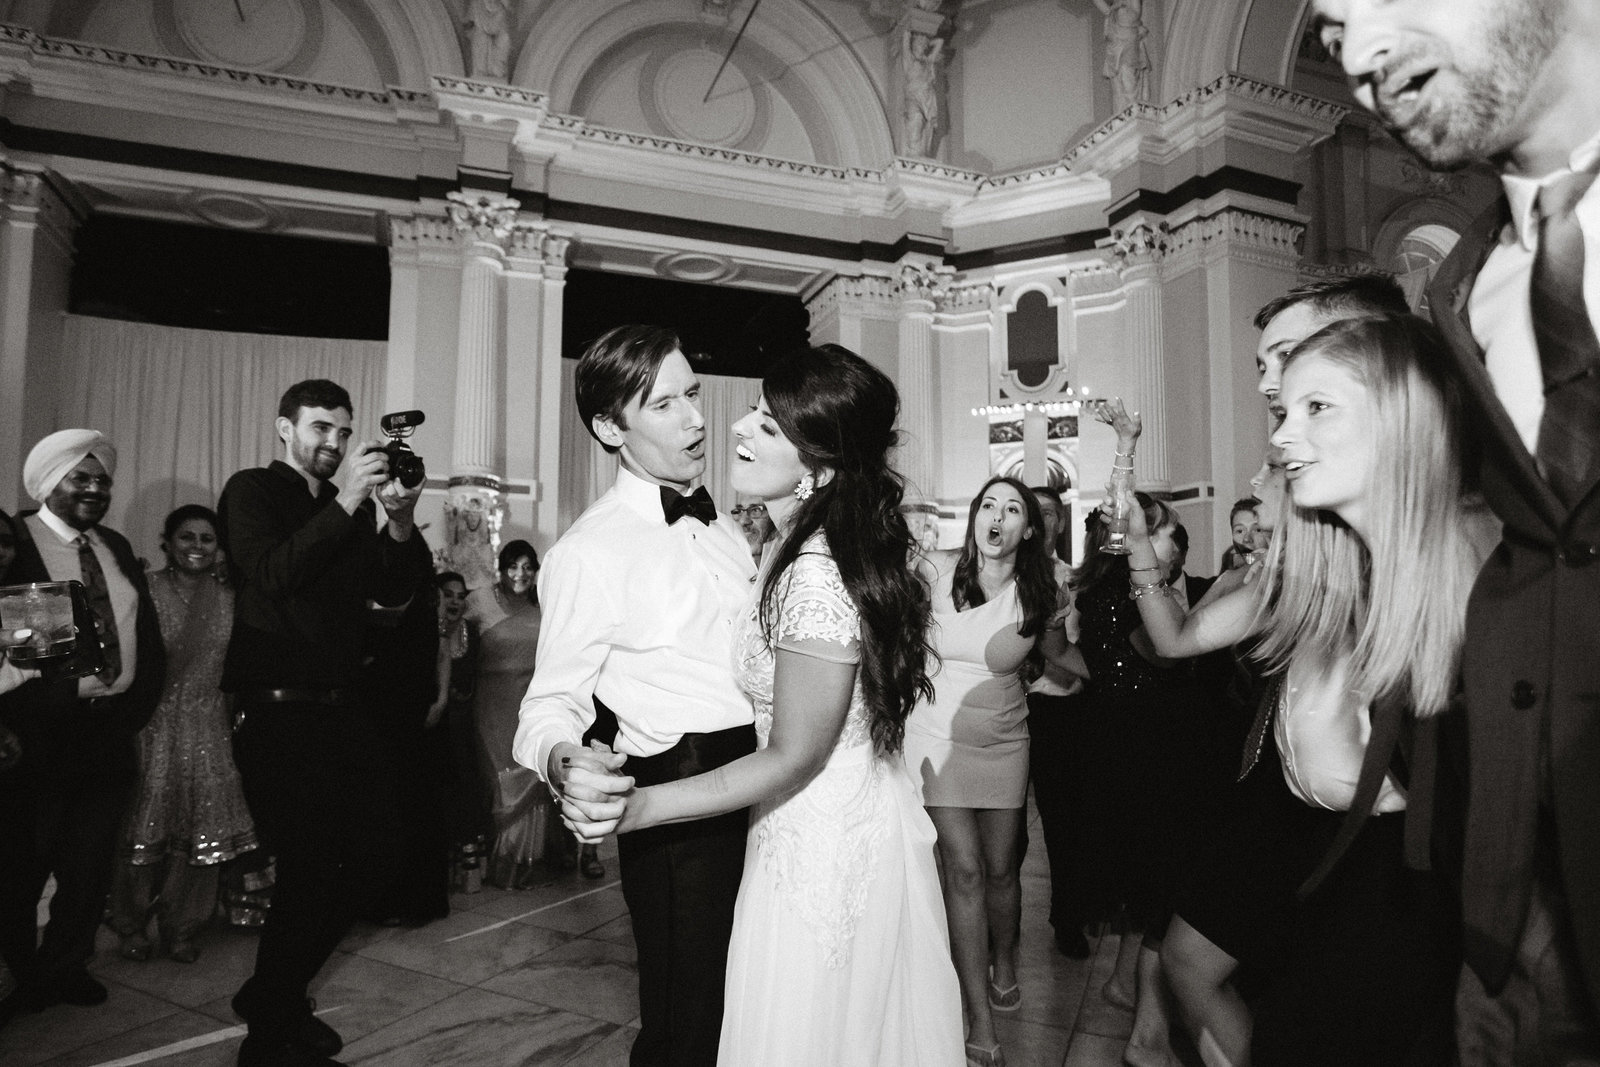 Bride and groom celebrating their love with a dance at this Philadelphia museum wedding venue.